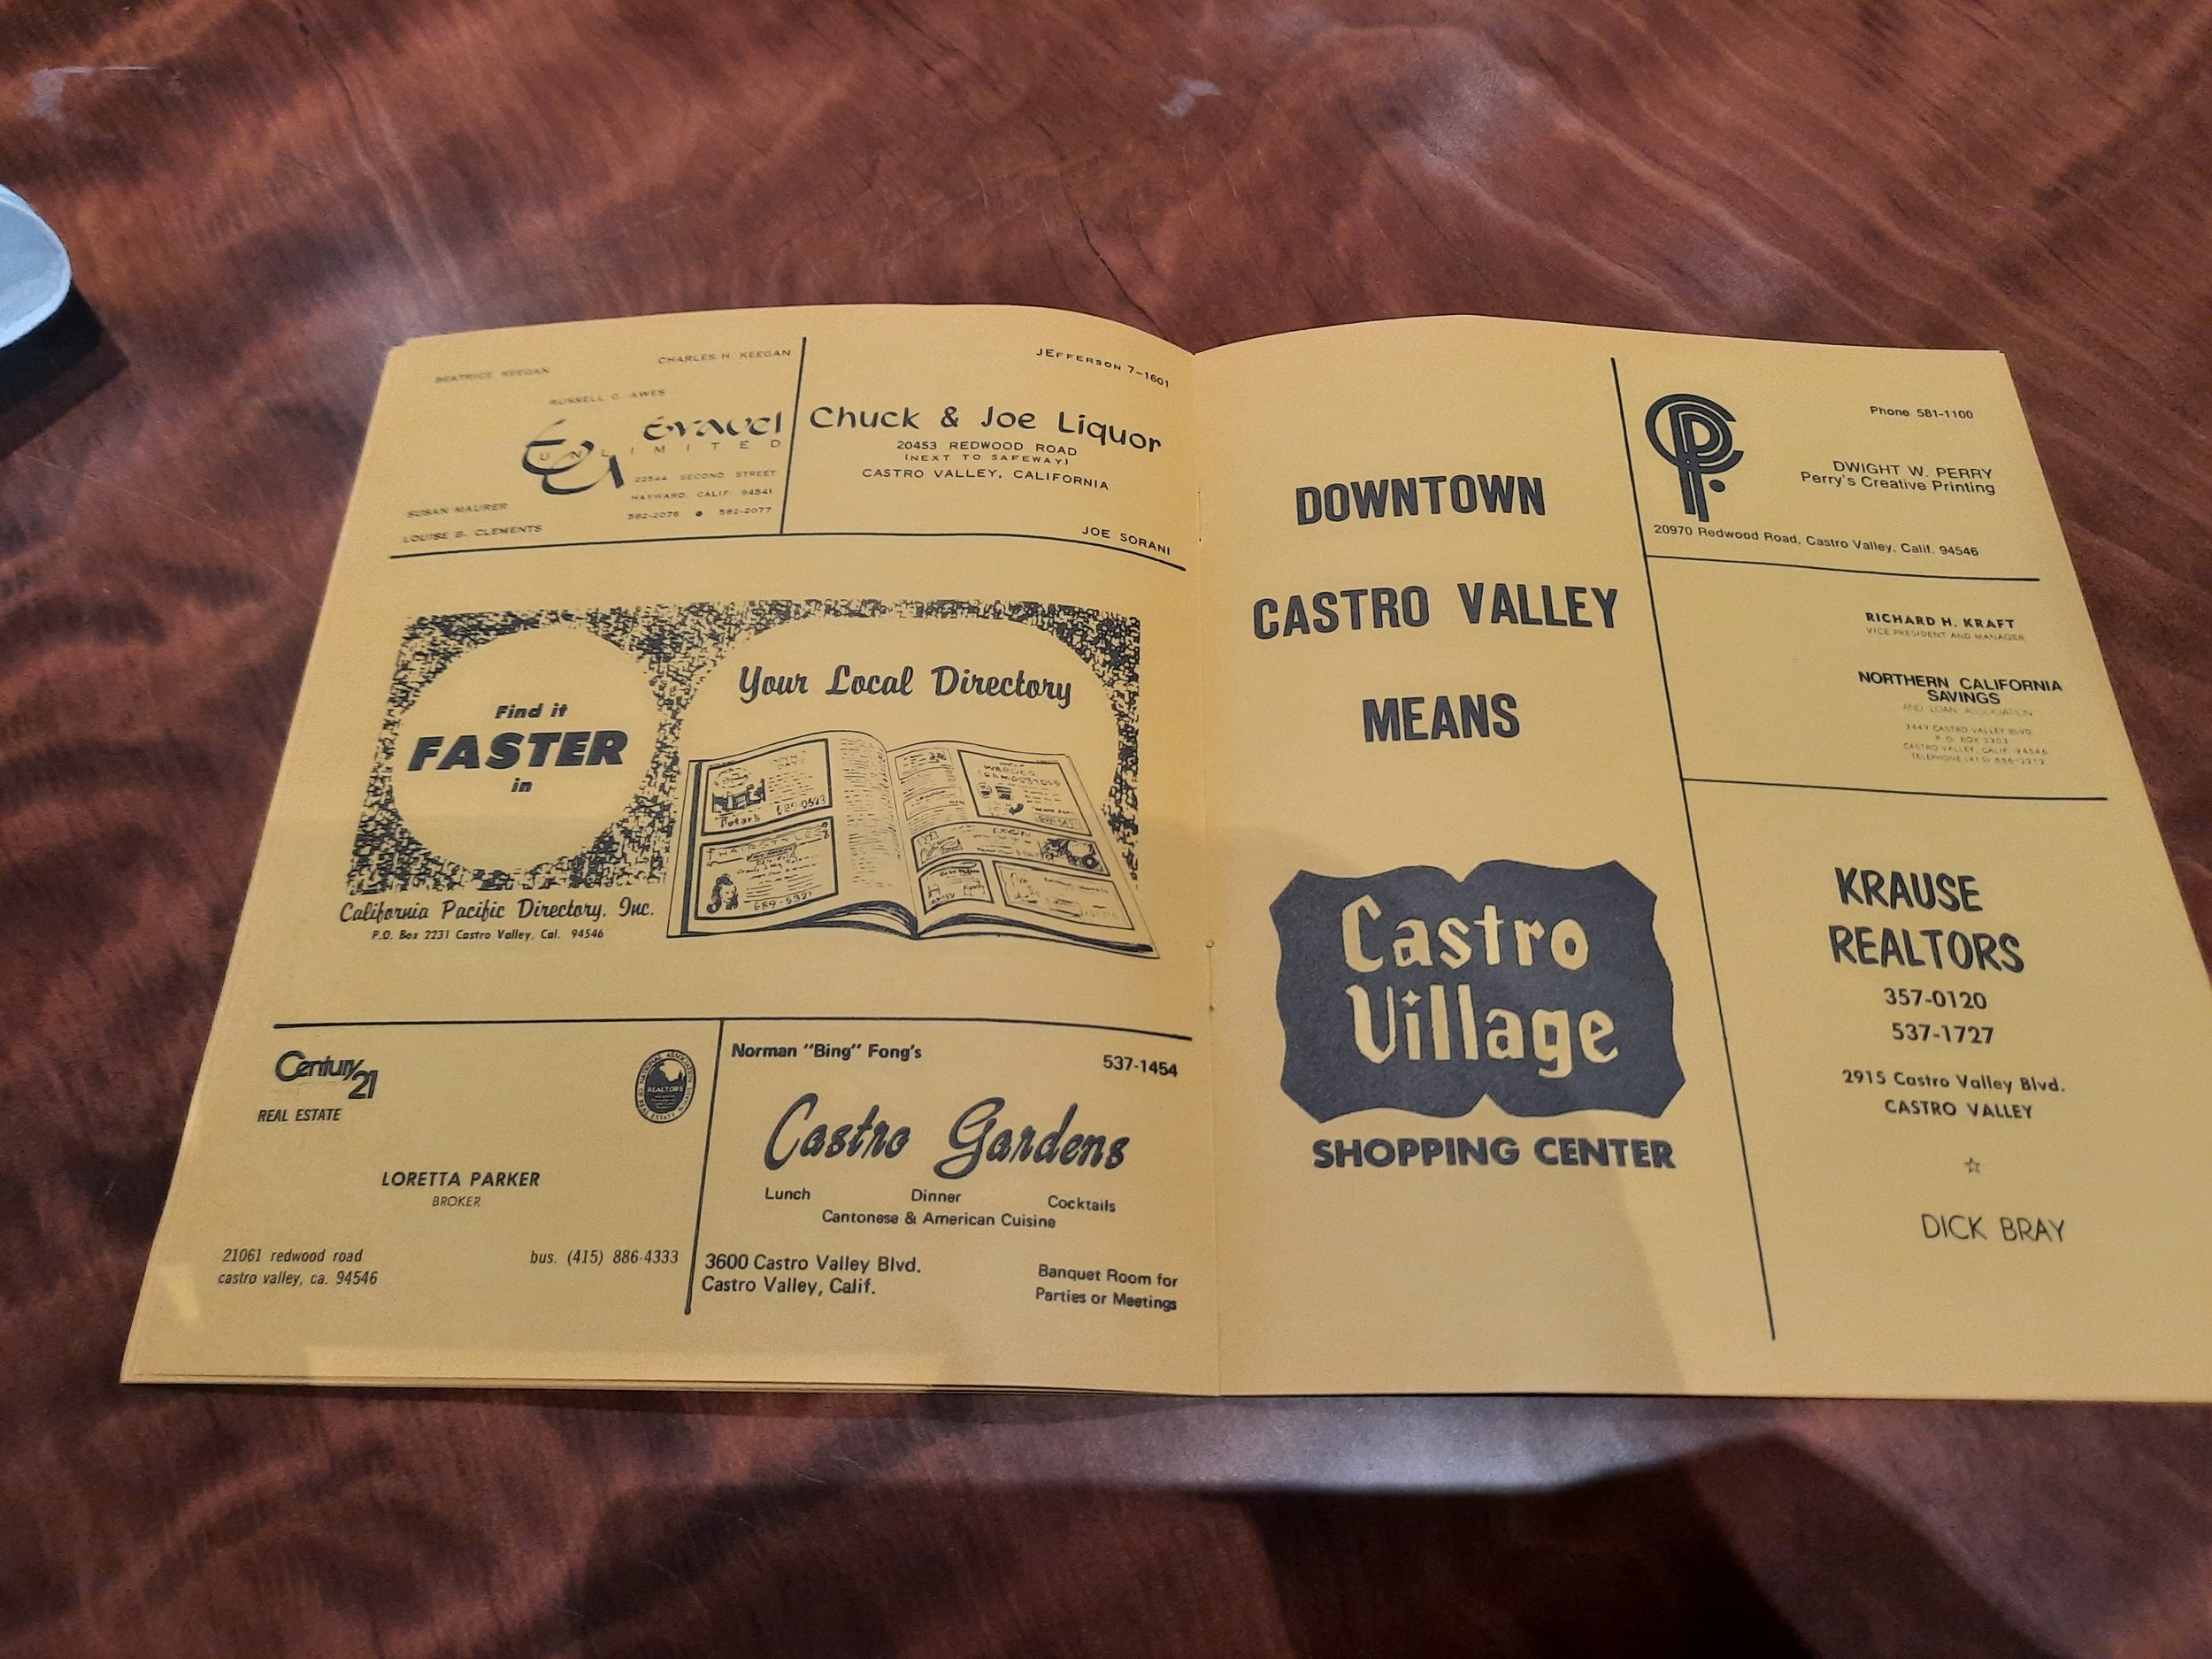  The Fall Festival got its start at the Castro Village Shopping Center in 1973. This brochure can be seen at the Chamber's kiosk now on display at the Castro Valley Marketplace. This year's Fall Festival is September 10-11. 